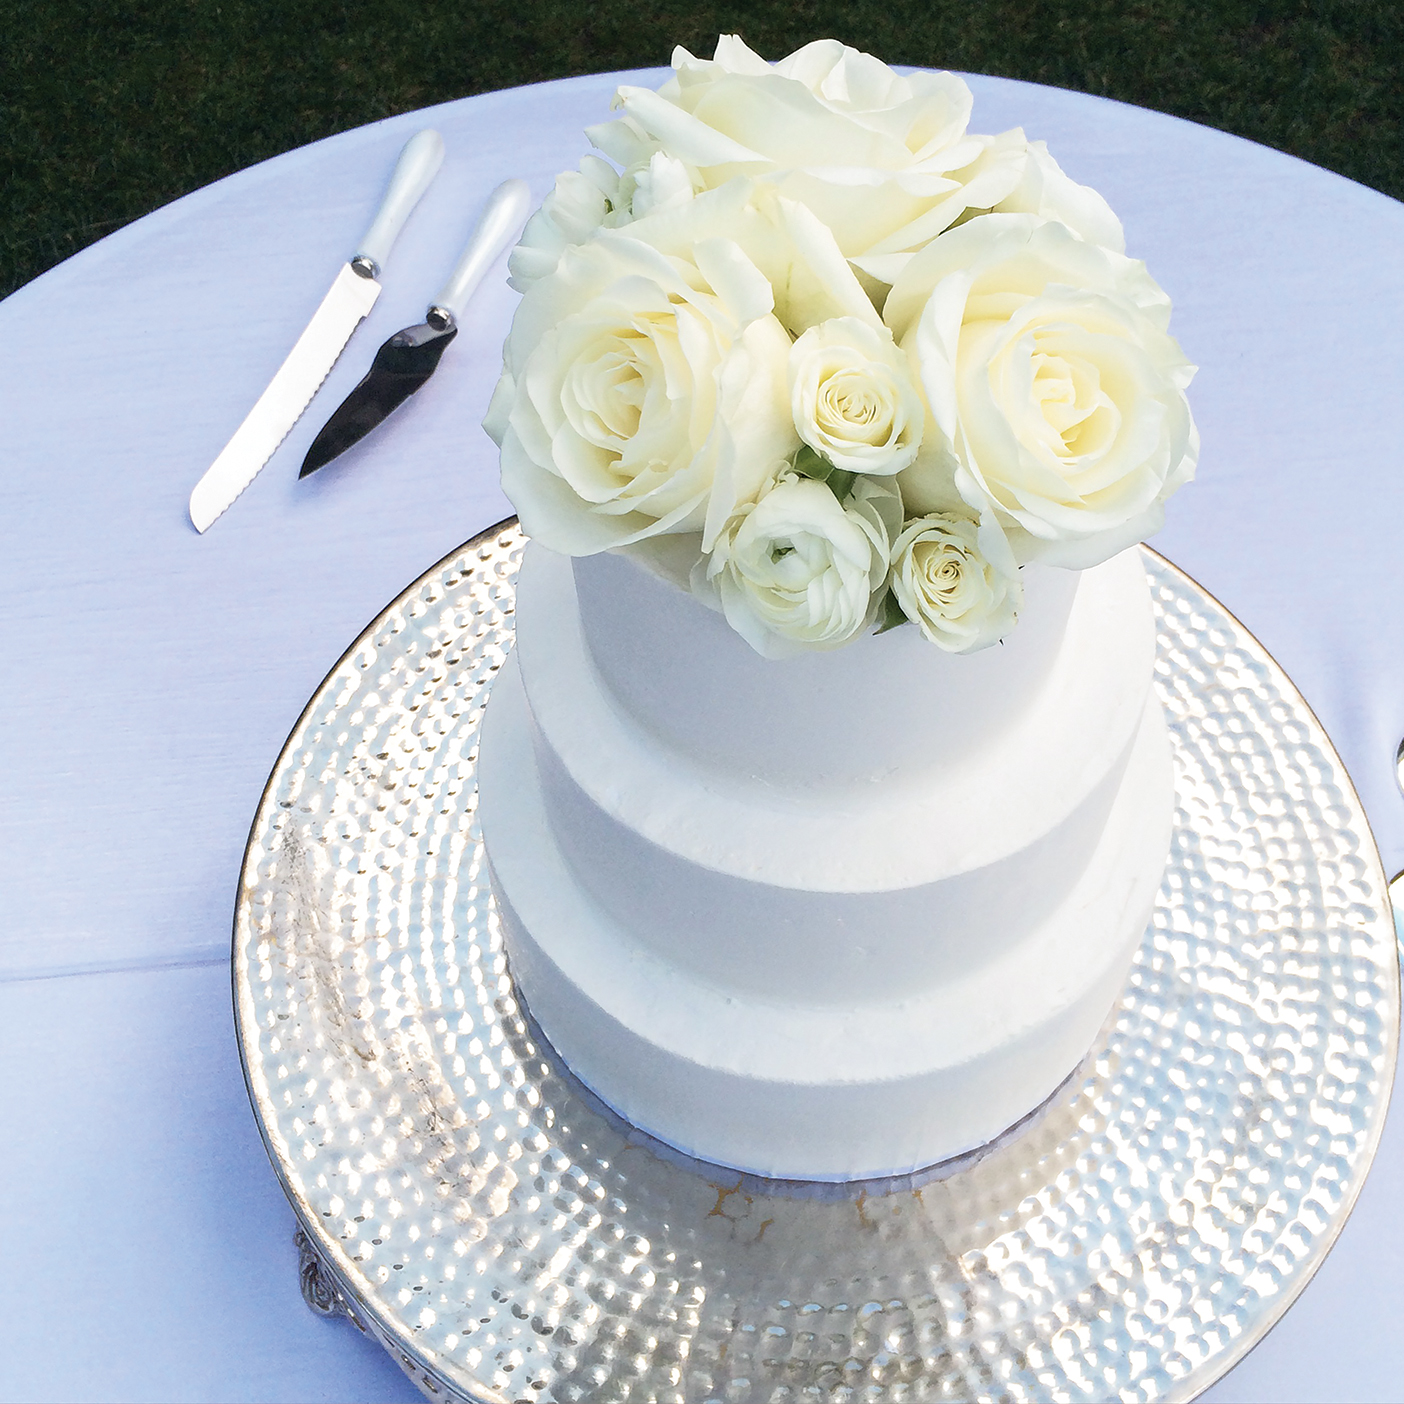 a photo of a white, three-tiered cake that is topped with white roses and displayed on a table with a white tablecloth